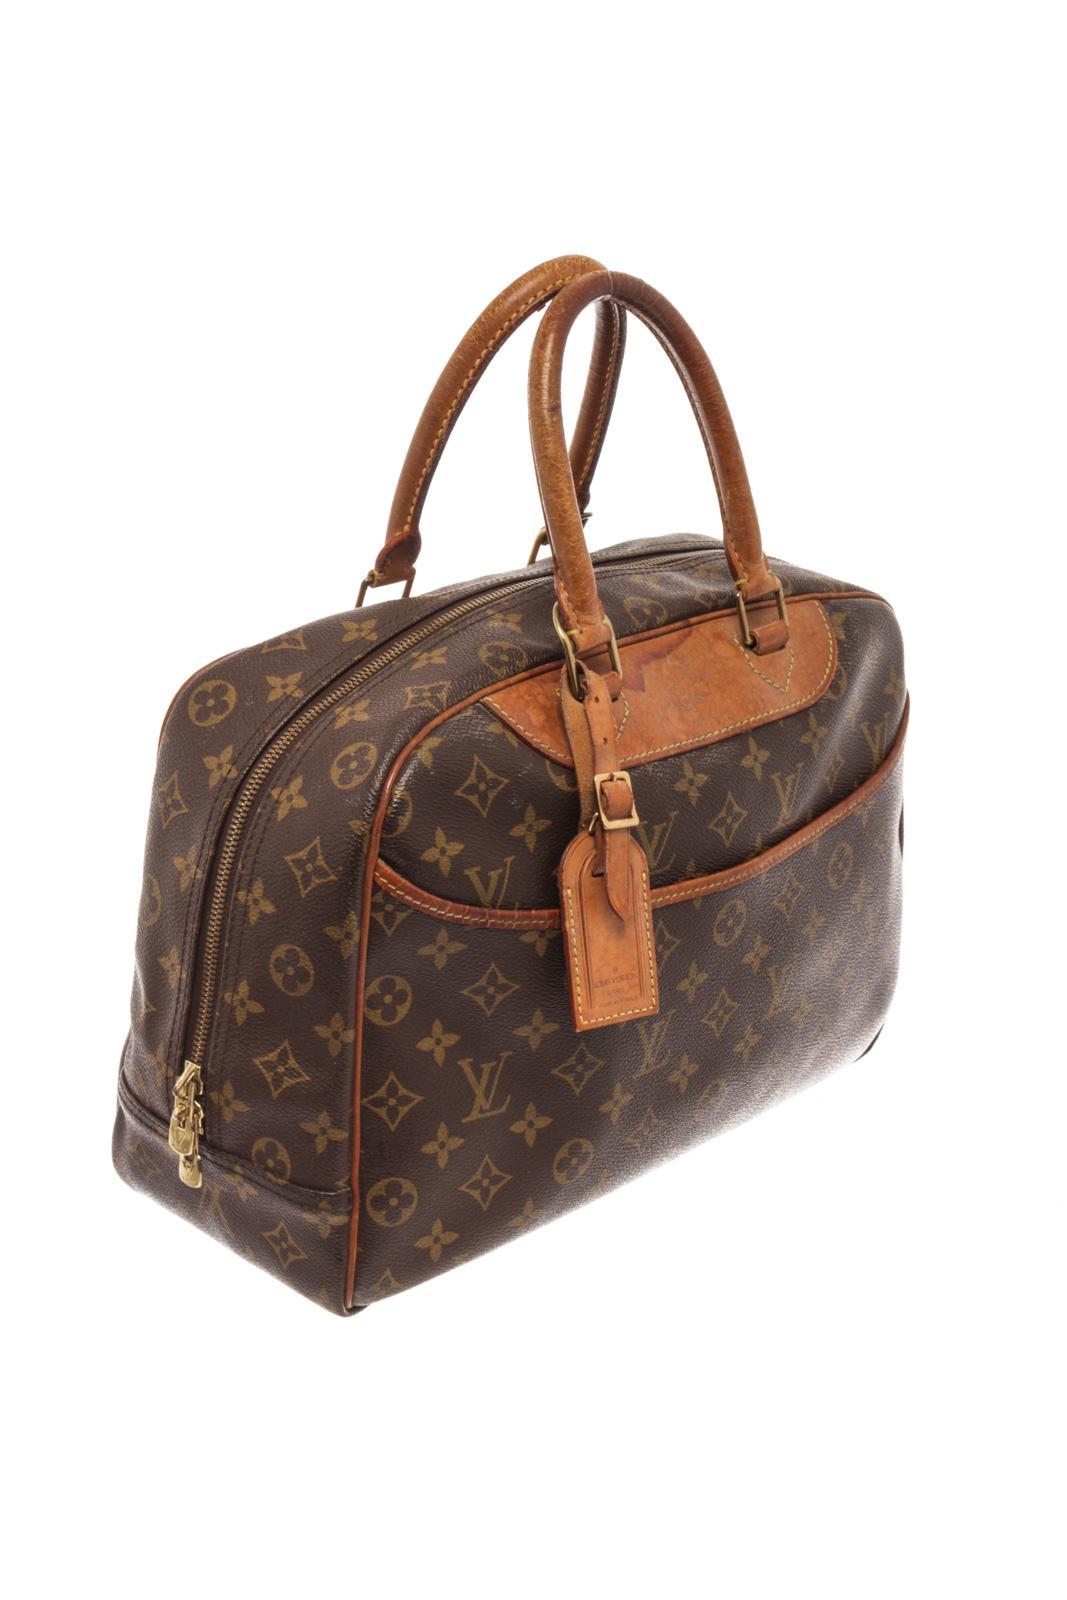 Louis Vuitton Brown Monogram Canvas Deauville Satchel Bag with gold-tone hardware, monogram canvas, leather tag, debossed logo, two-way zip fastening, two rounded top handles, front patch pocket, internal patch pockets, internal logo patch.

83982MSC